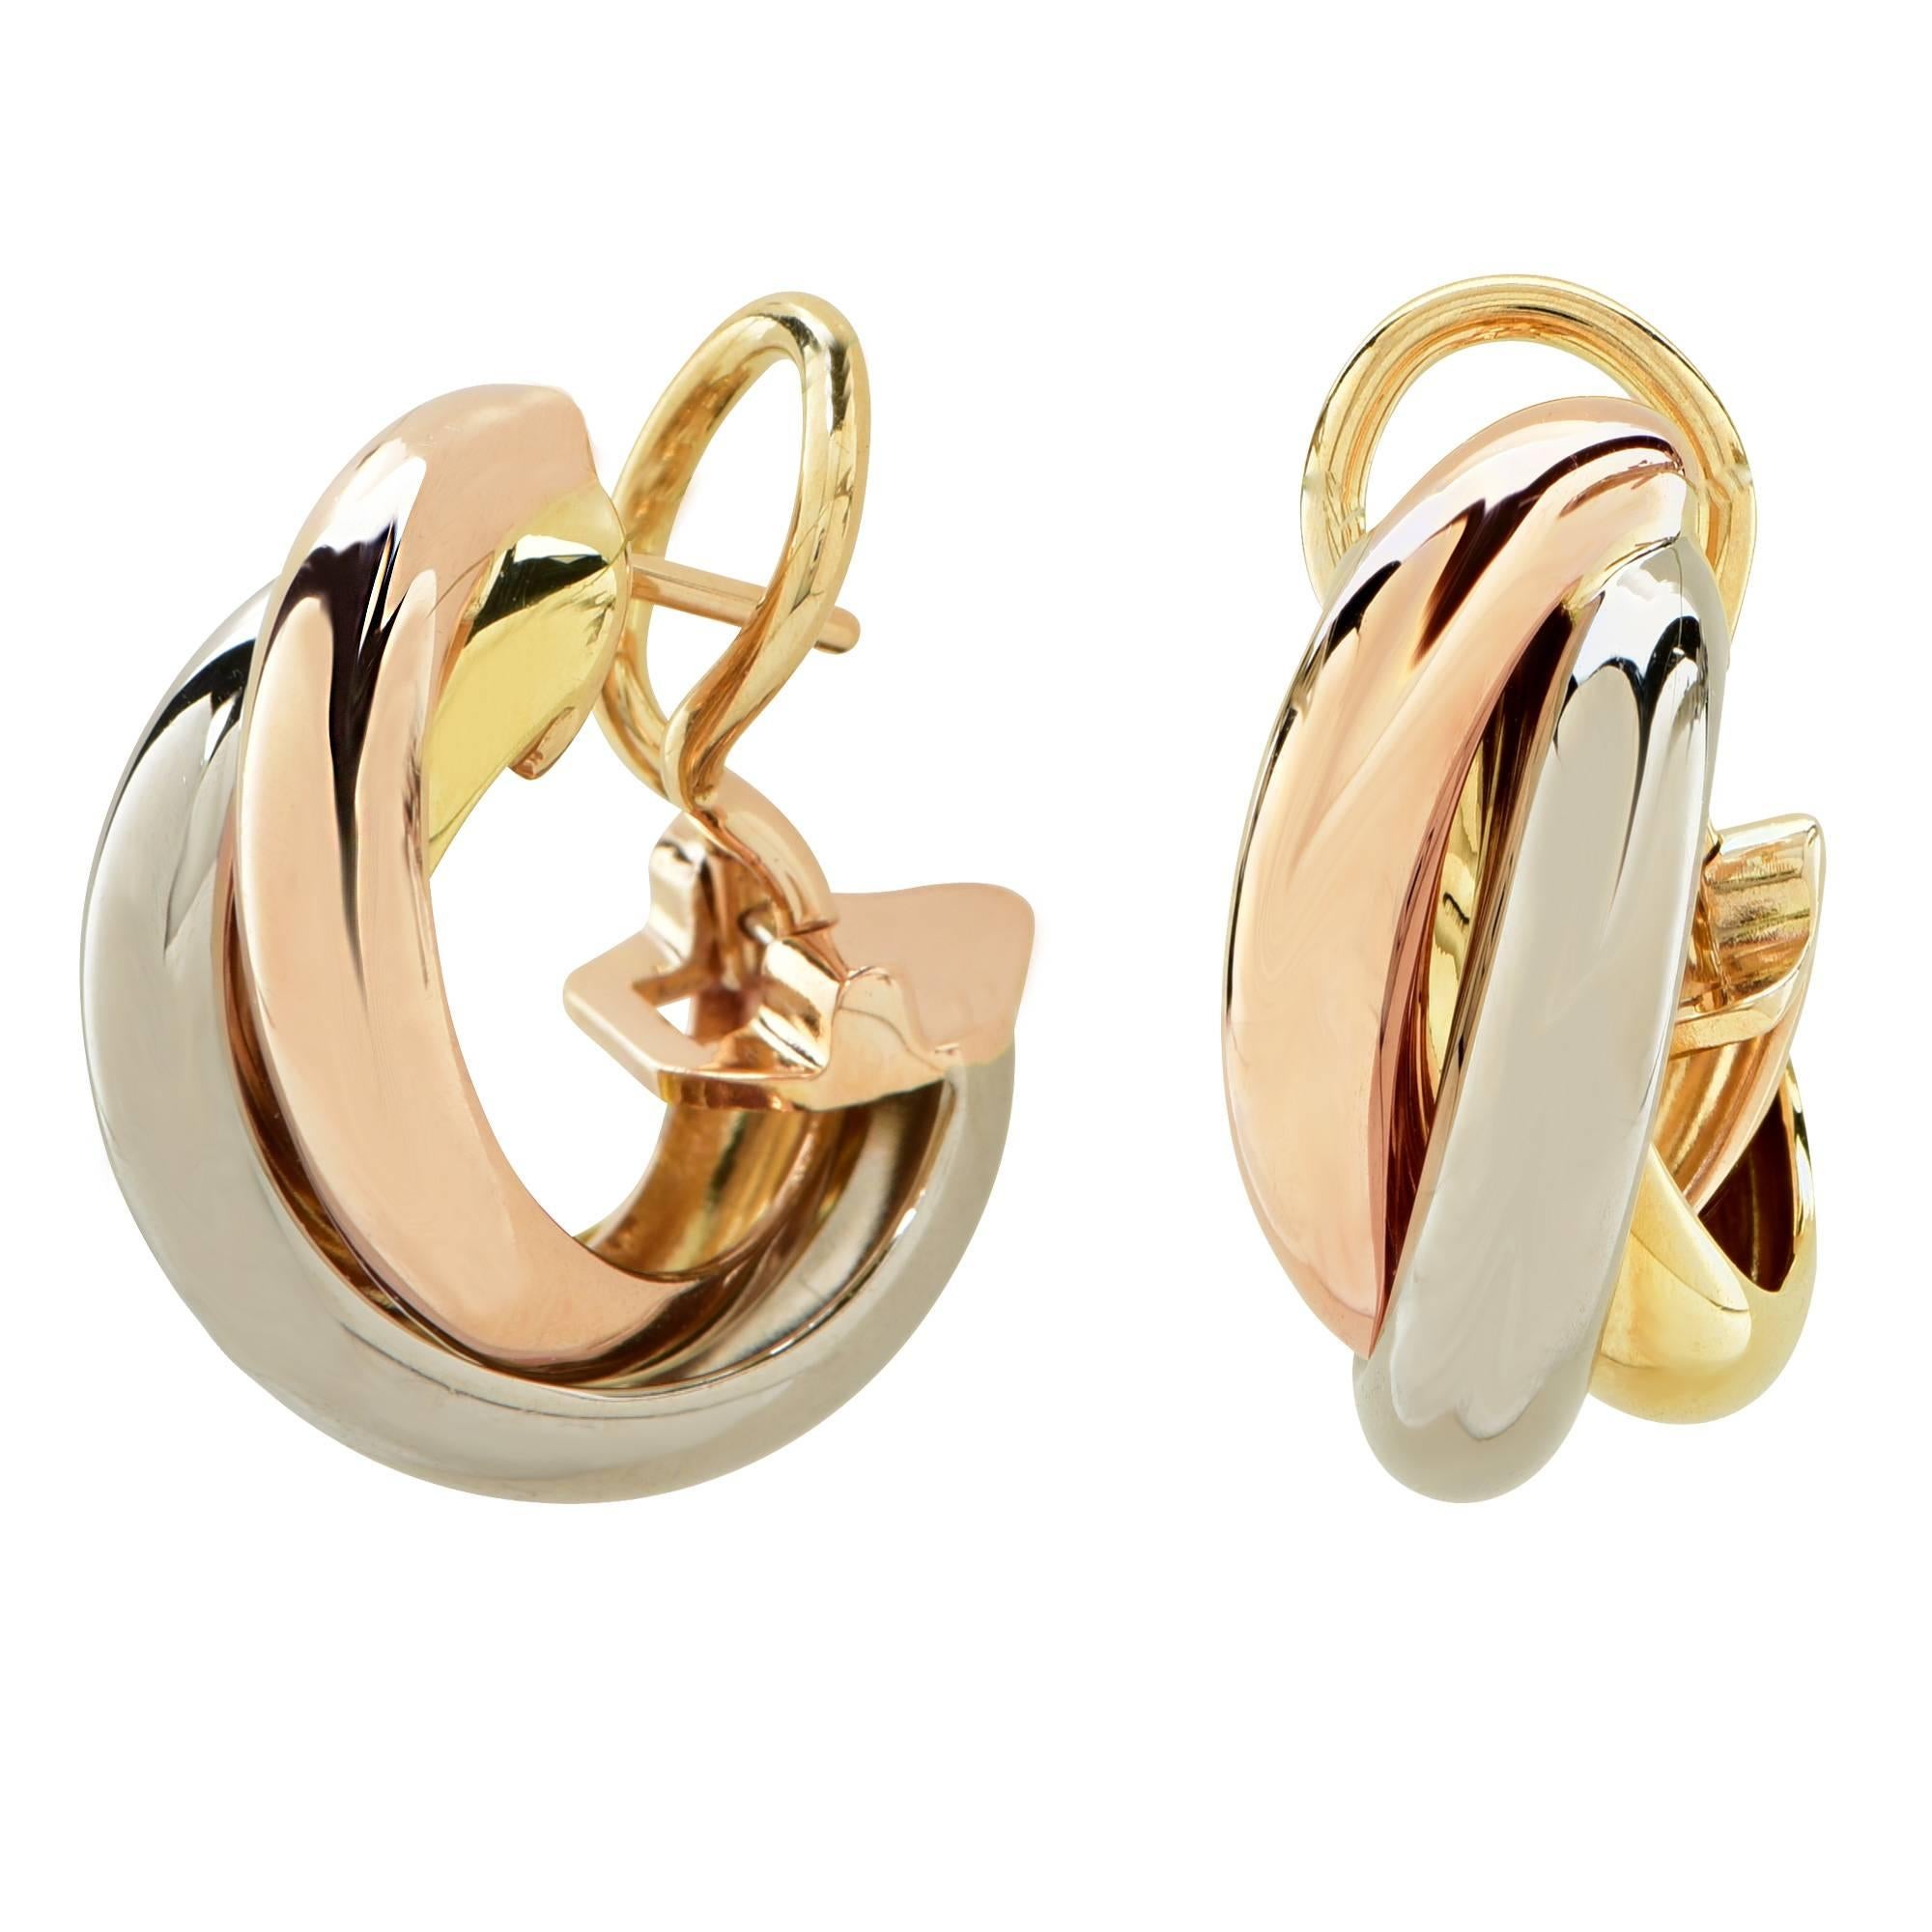 Cartier Trinity hoop earrings, featuring three bands, three colors, pink,yellow and white gold. Cartier created this design in 1924 and the style quickly earned iconic status. The tri-color gold represents, pink for love, yellow for fidelity and